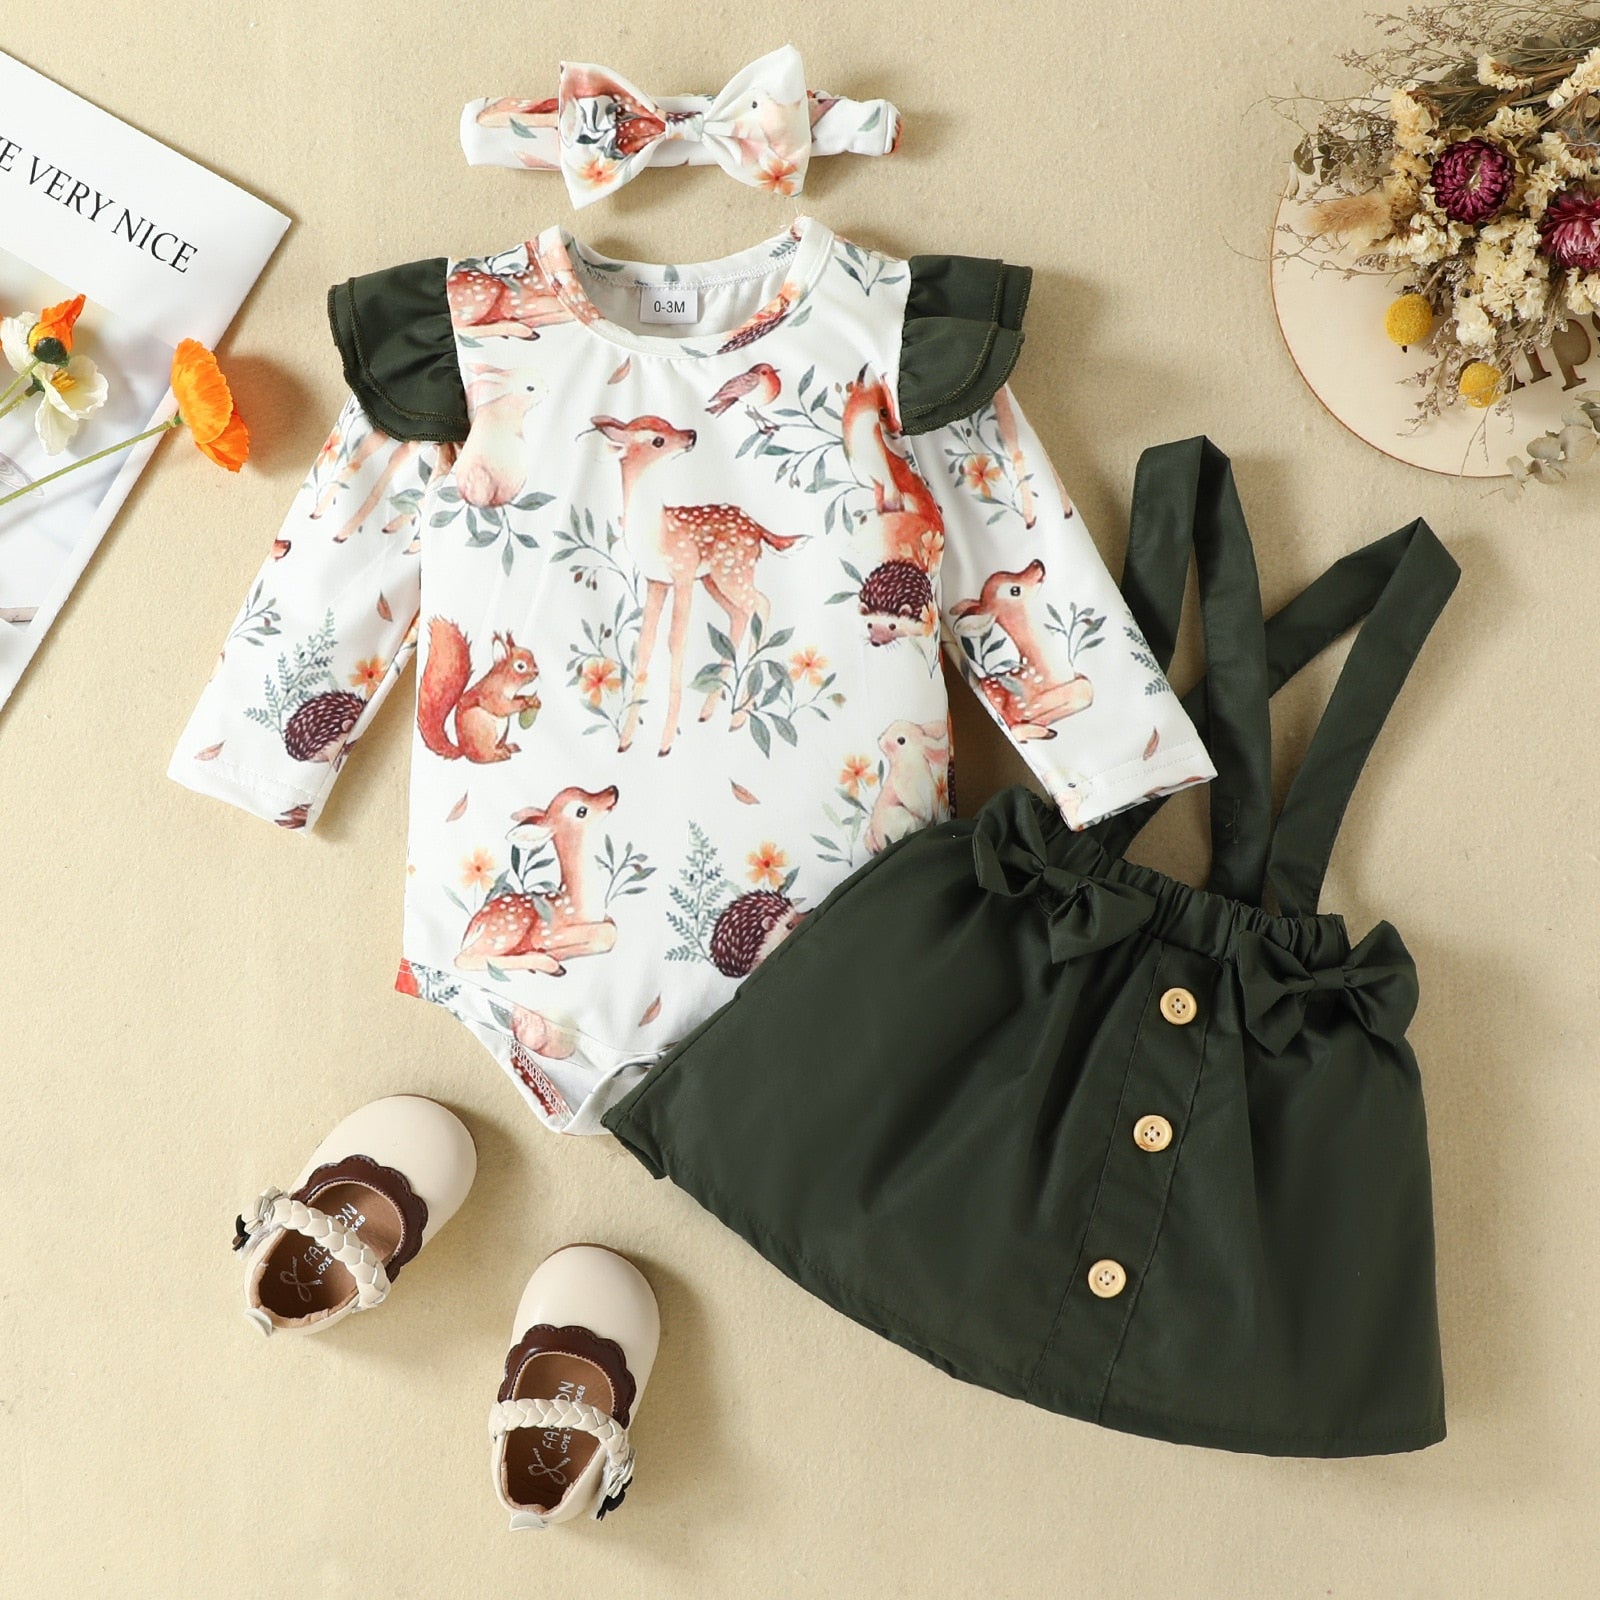 Adorable Baby Girl Outfits with Fox Dress and Heart Romper